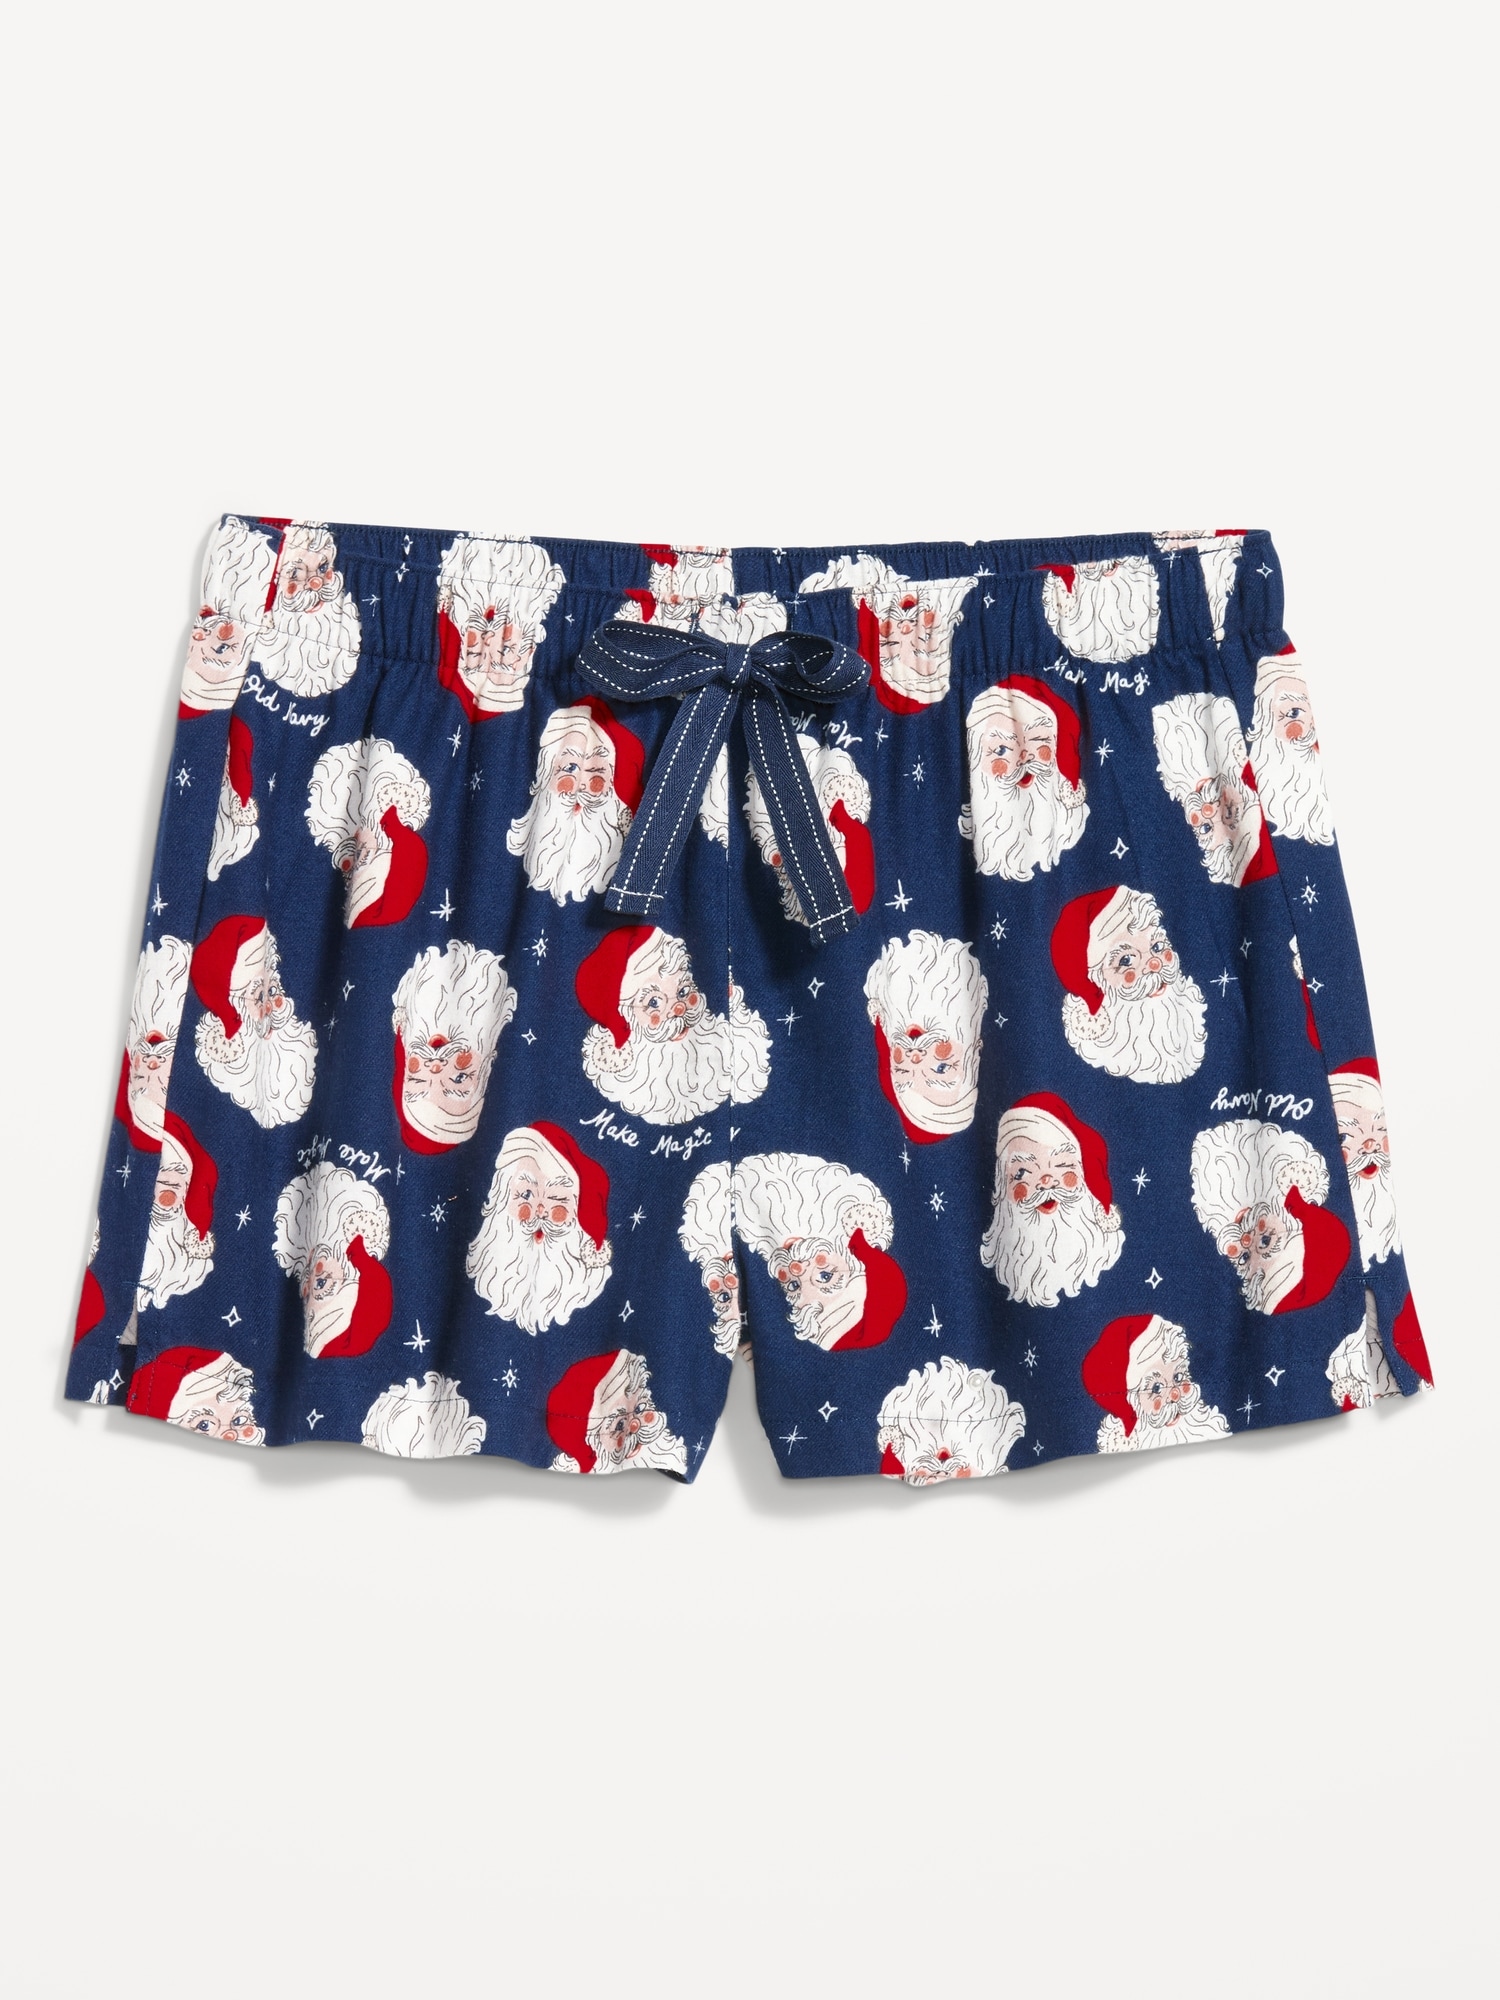 Old Navy Matching Flannel Pajama Shorts for Women -- 2.5-inch